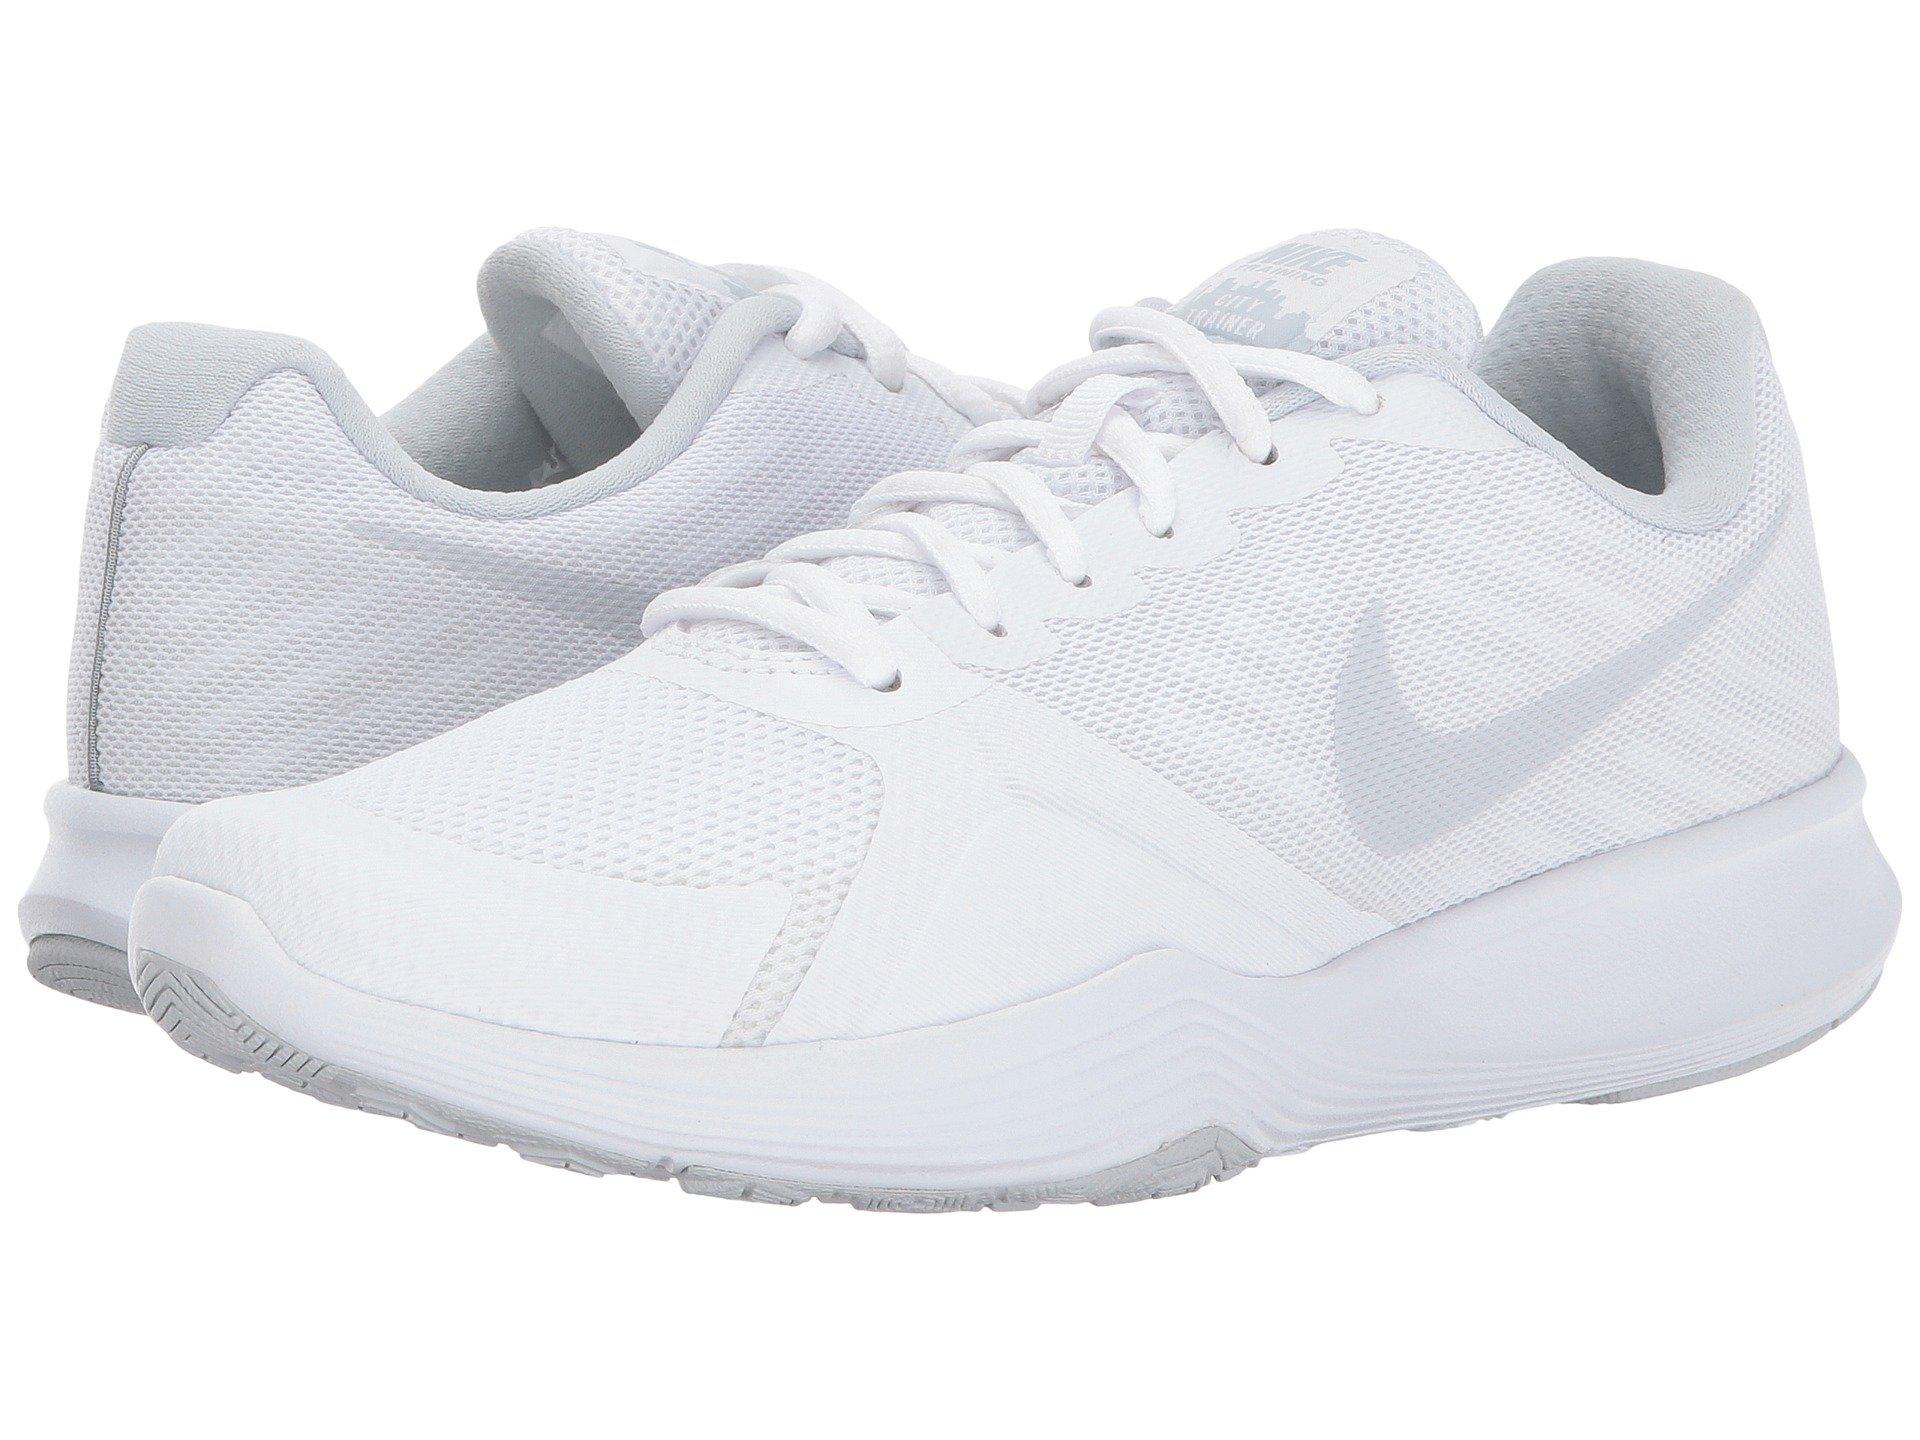 Nike City Trainer White Poland, SAVE 45% - aveclumiere.com